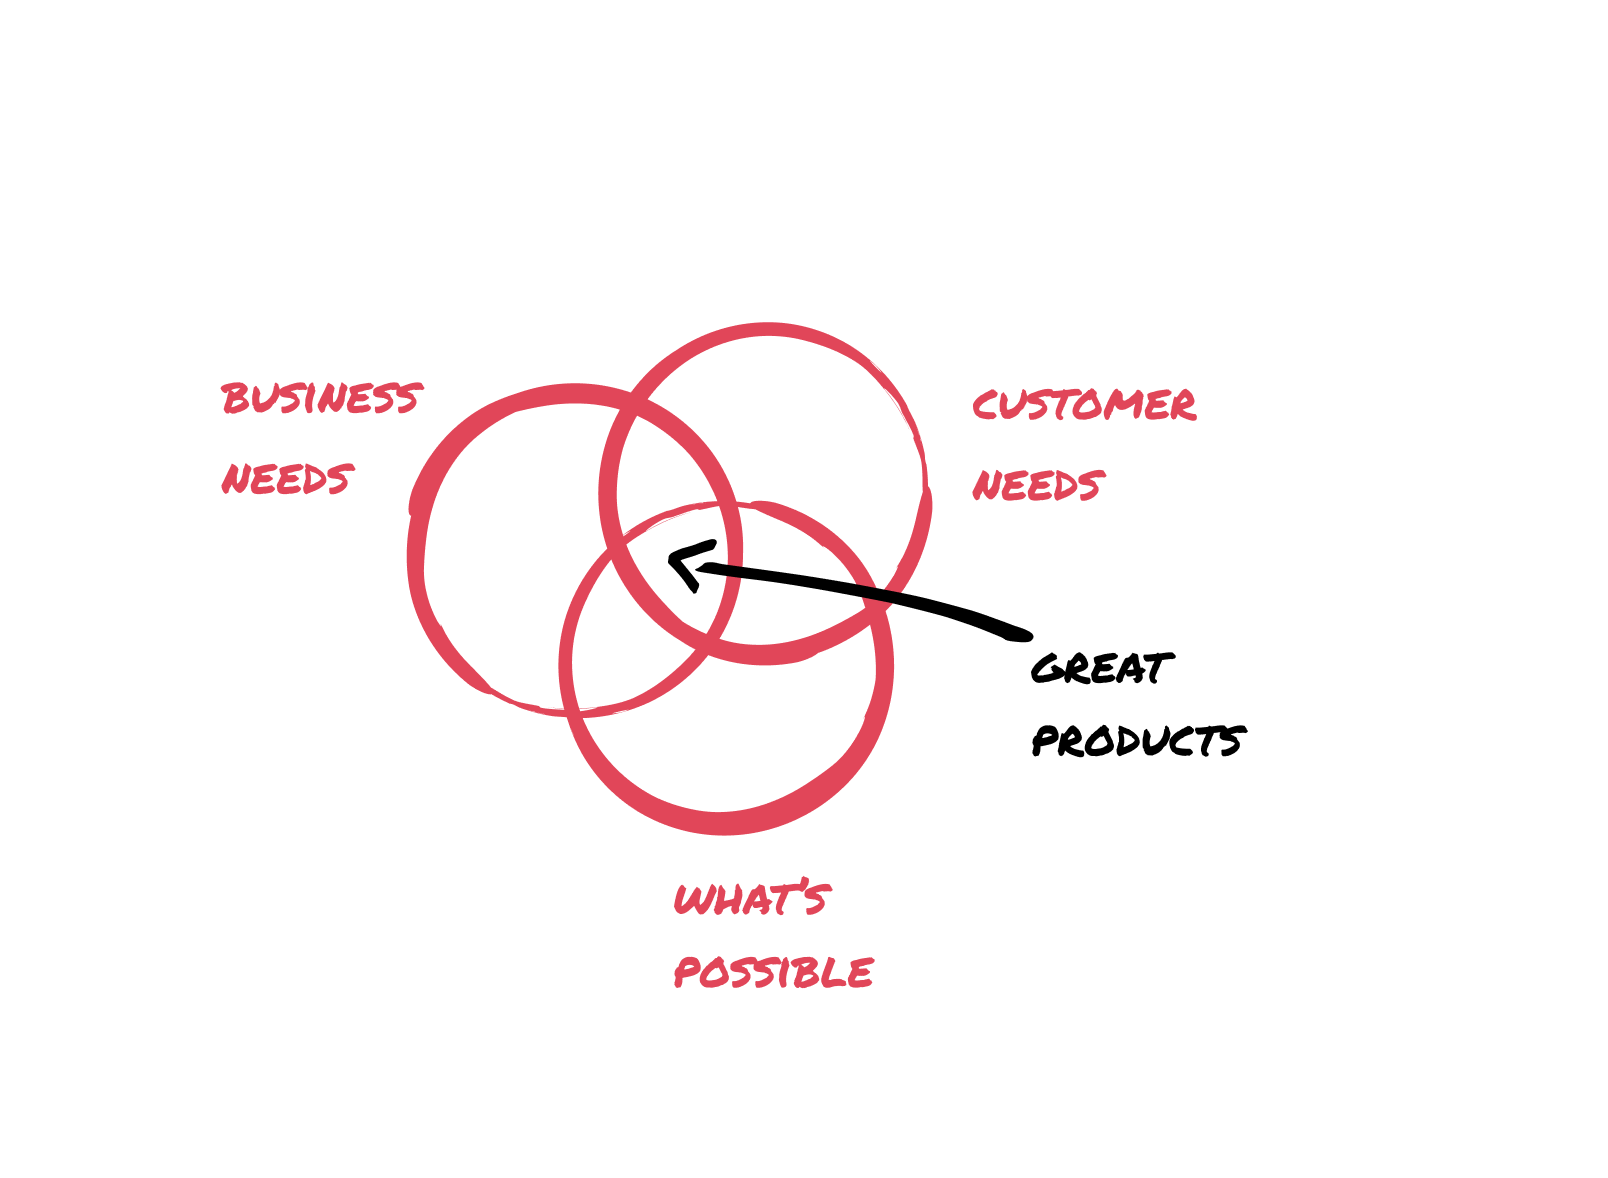 A venn diagram of business needs, customer needs, and "what's possible". An arrow points to the overlap of all three circles with the note "Great Products".